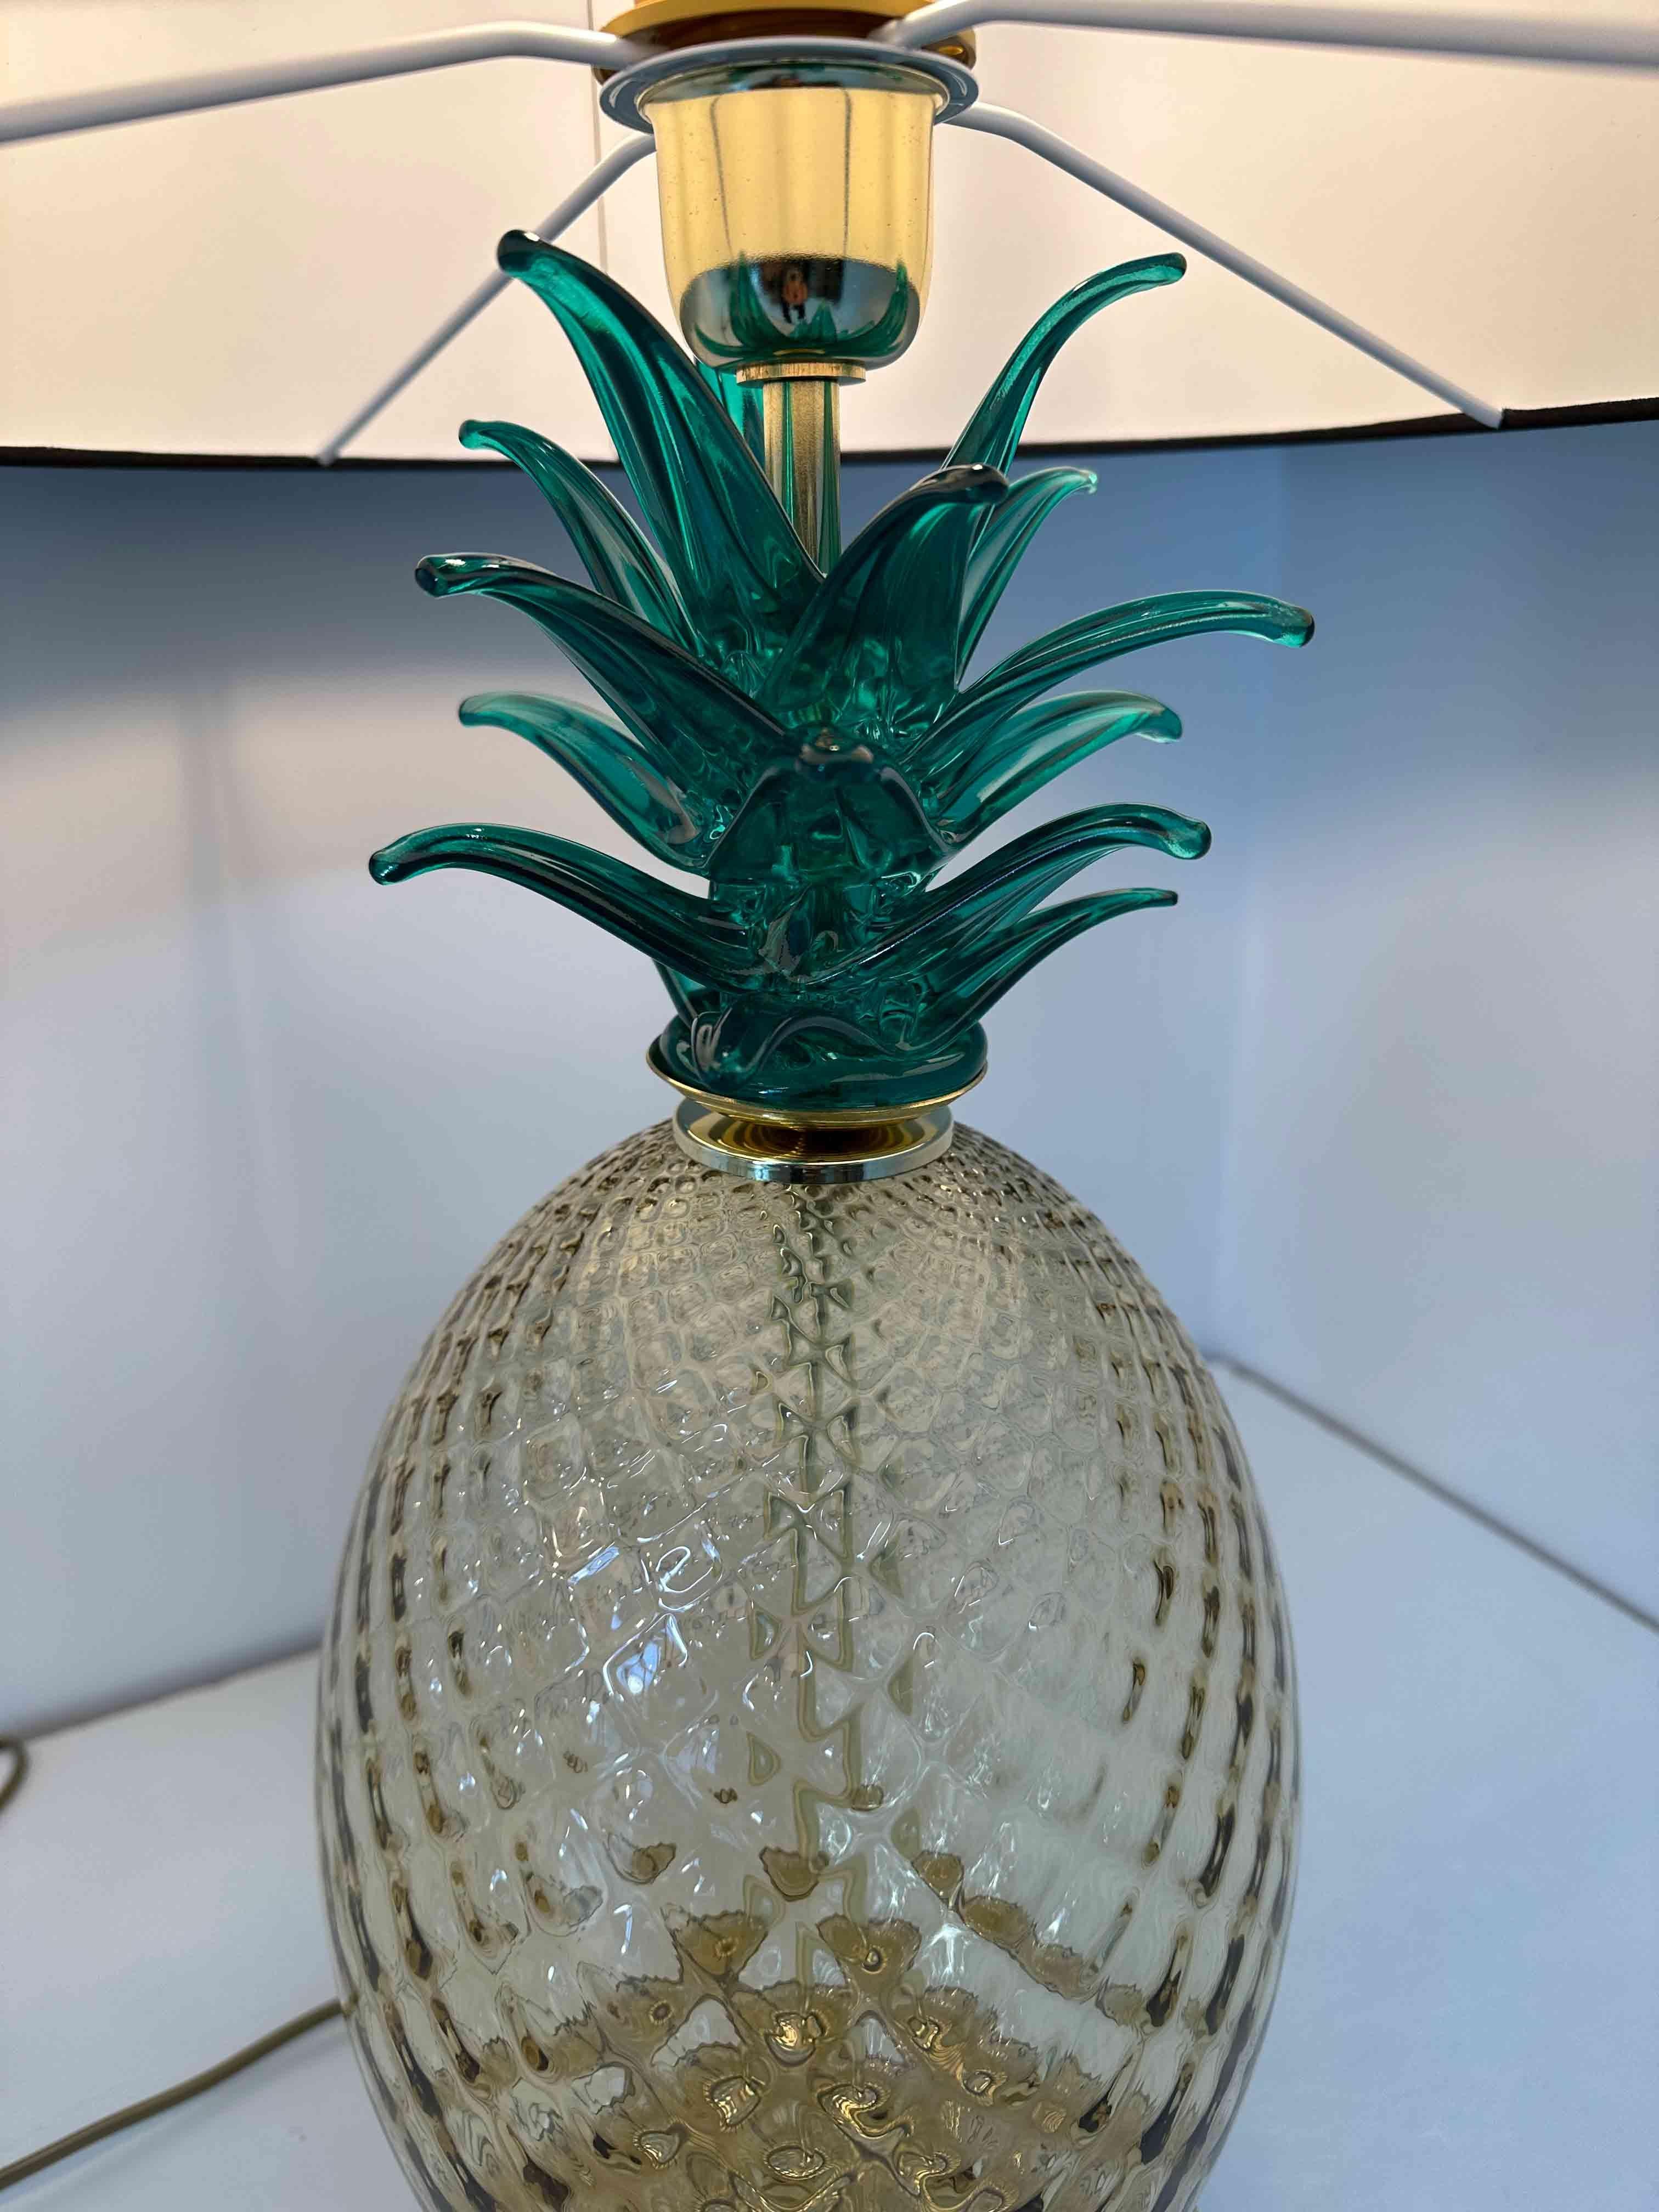 Pair of Italian Art Deco Pineapple Murano Glass Lamps with Lampshades  For Sale 4